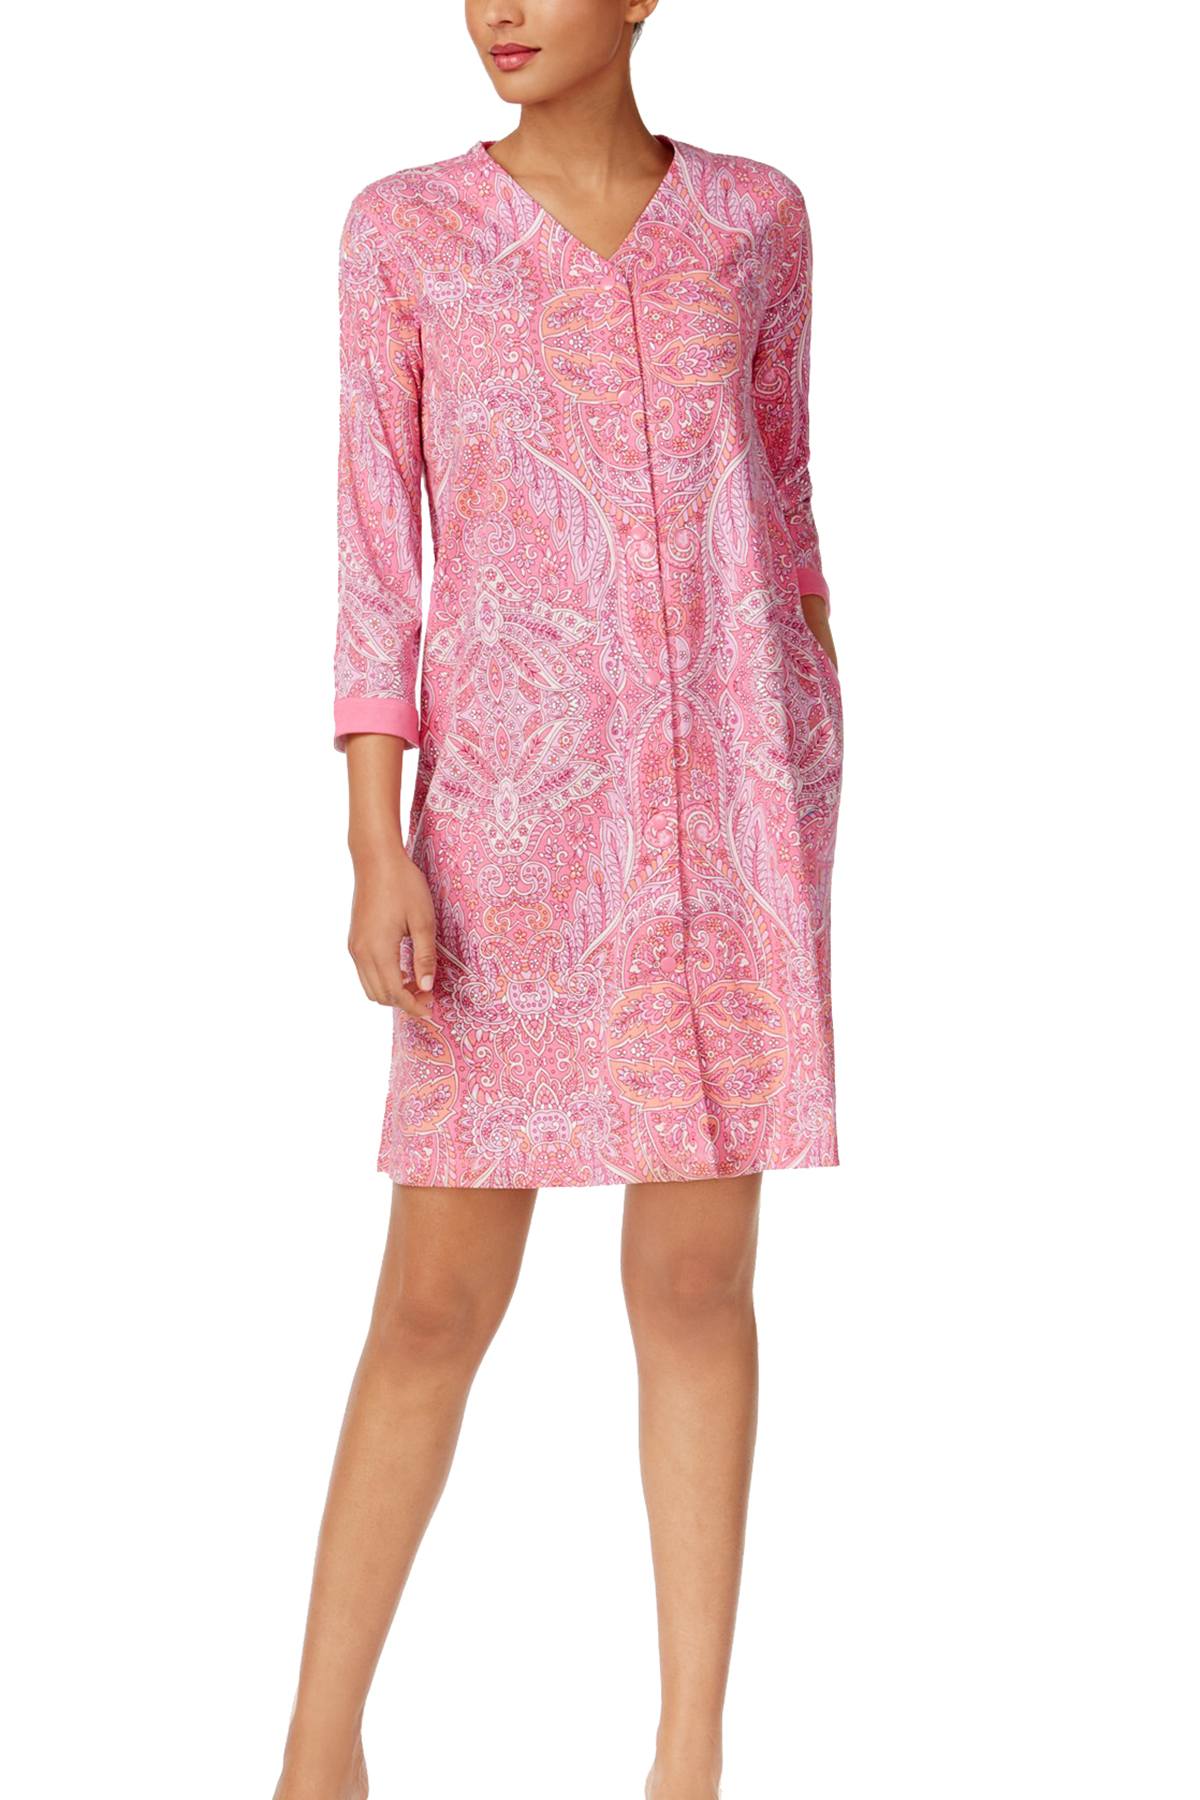 Miss Elaine Pink-Rose Paisley-Printed Snap-Front Robe